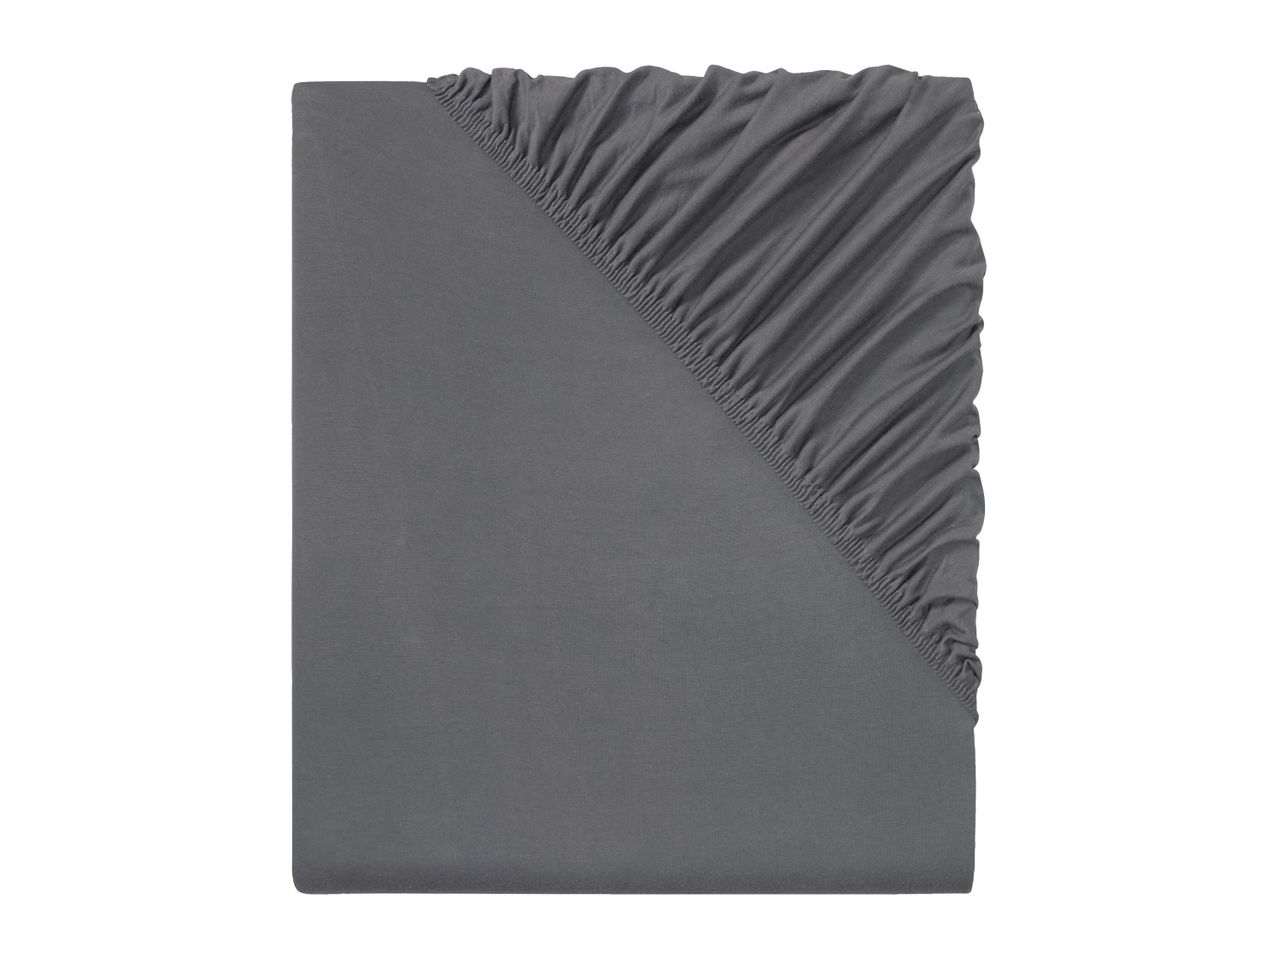 Go to full screen view: Livarno Home Jersey Fitted Sheet - King - Image 2